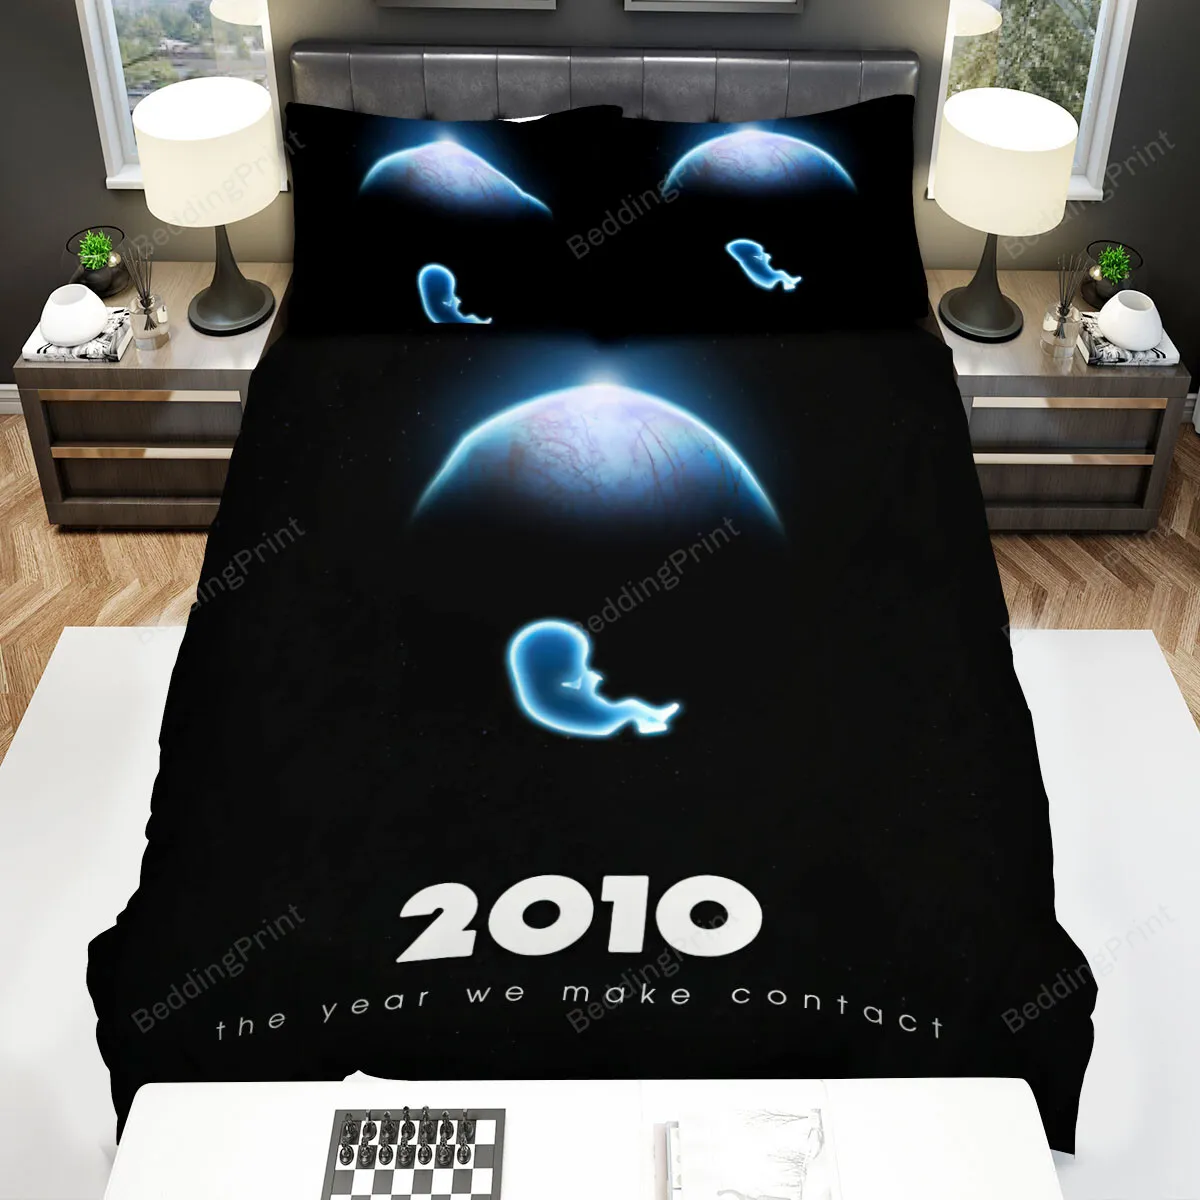 2010 The Year We Make Contact Fetus Bed Sheets Spread Comforter Duvet Cover Bedding Sets